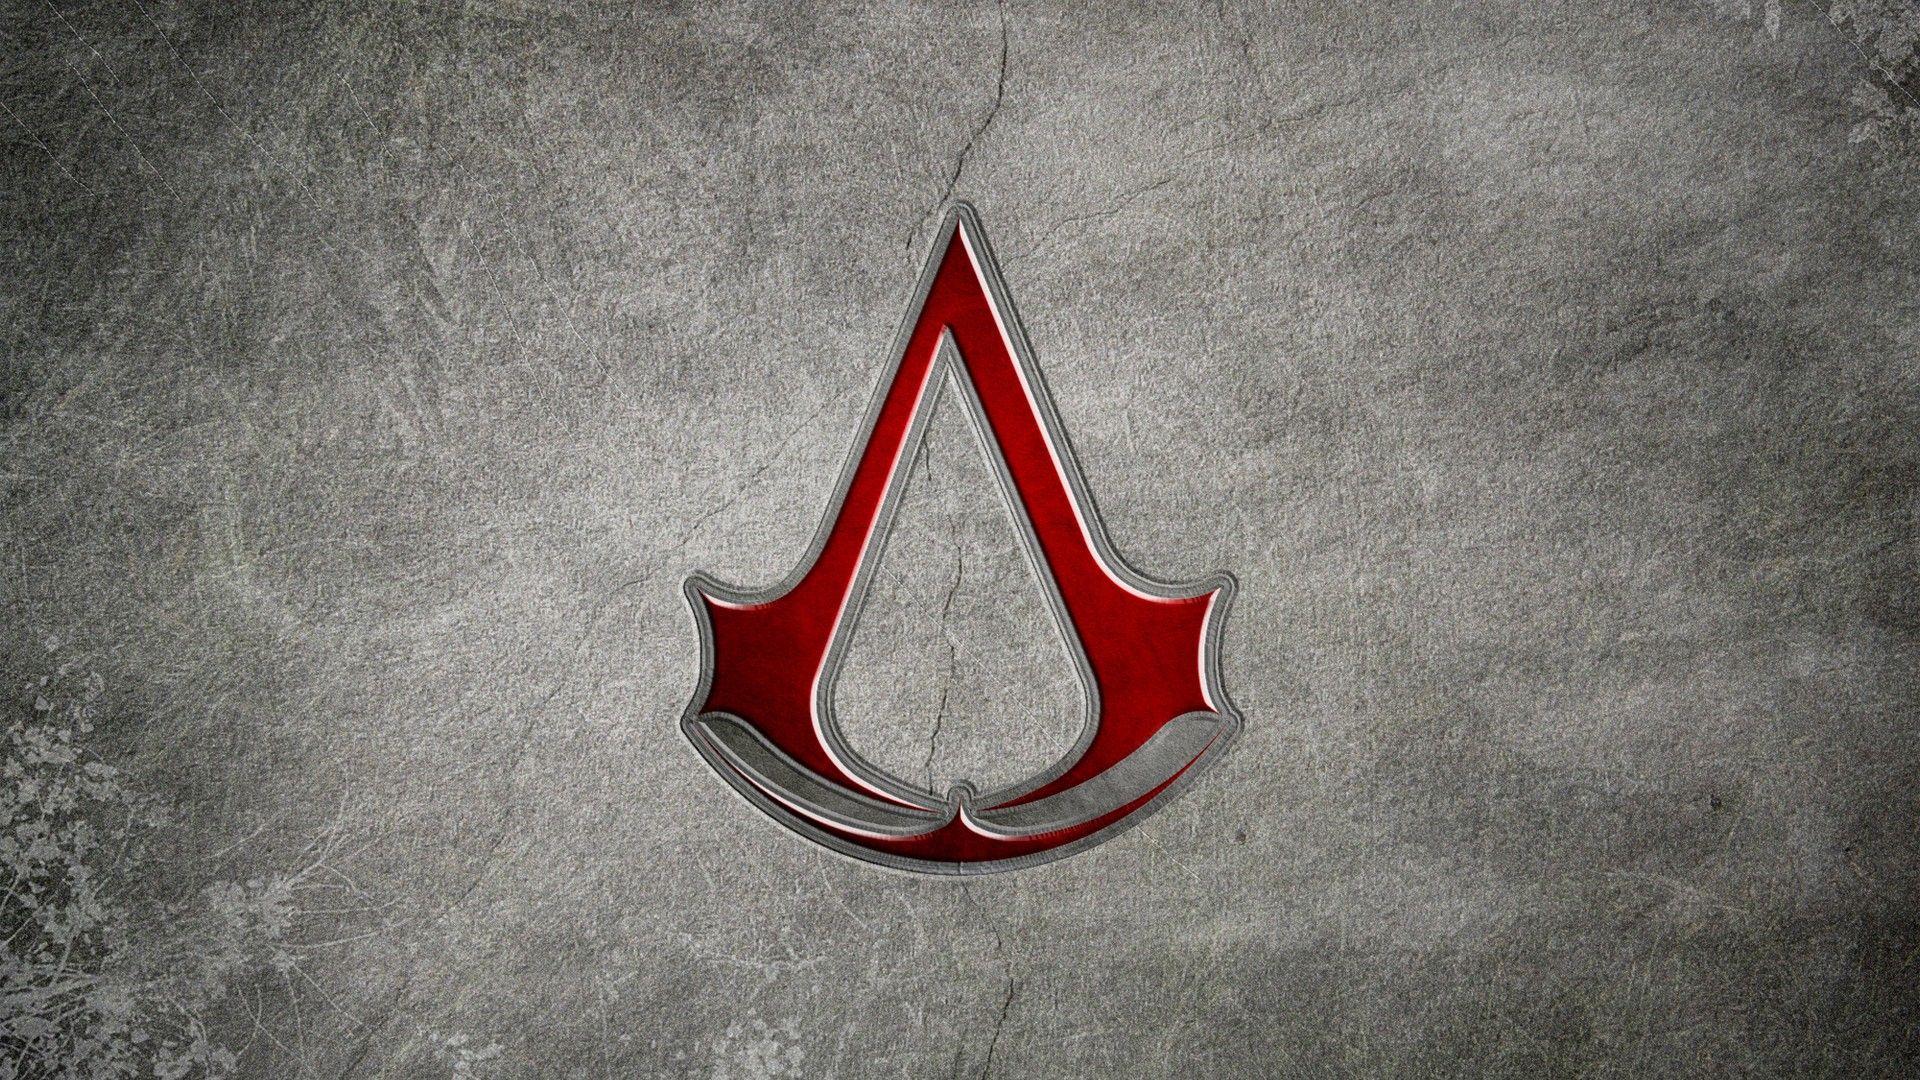 Assassin's Creed Wallpapers on WallpaperDog